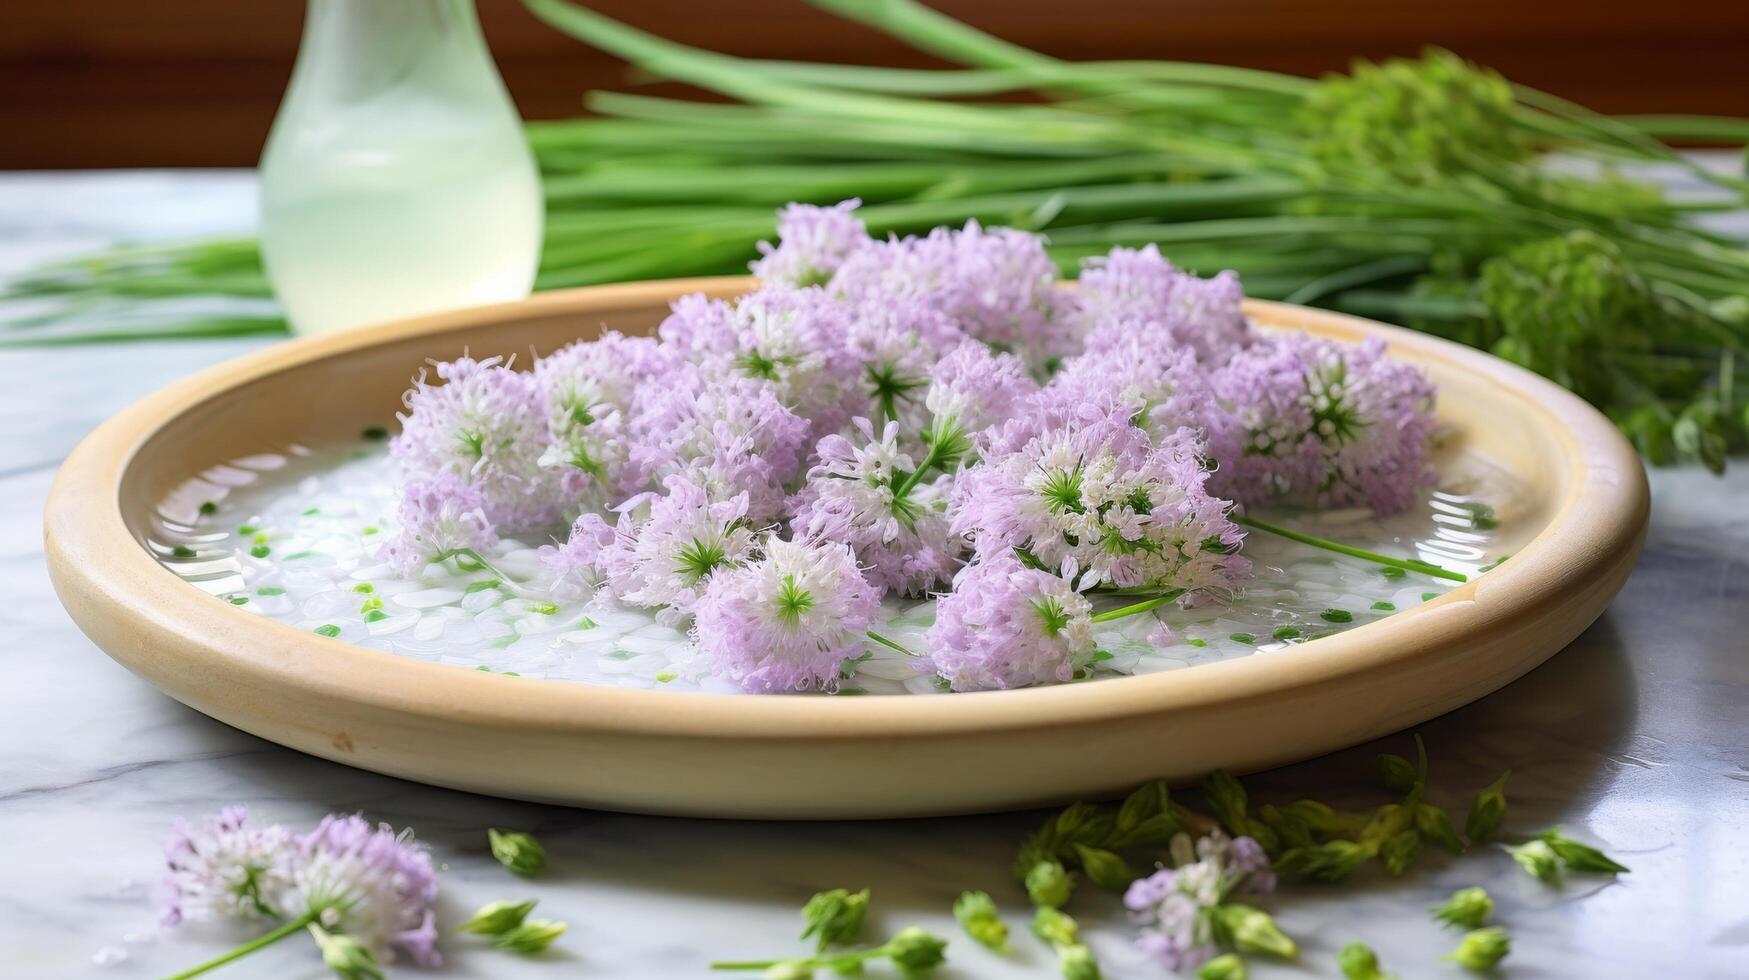 Marble tray holds freshly cut chive blossoms photo